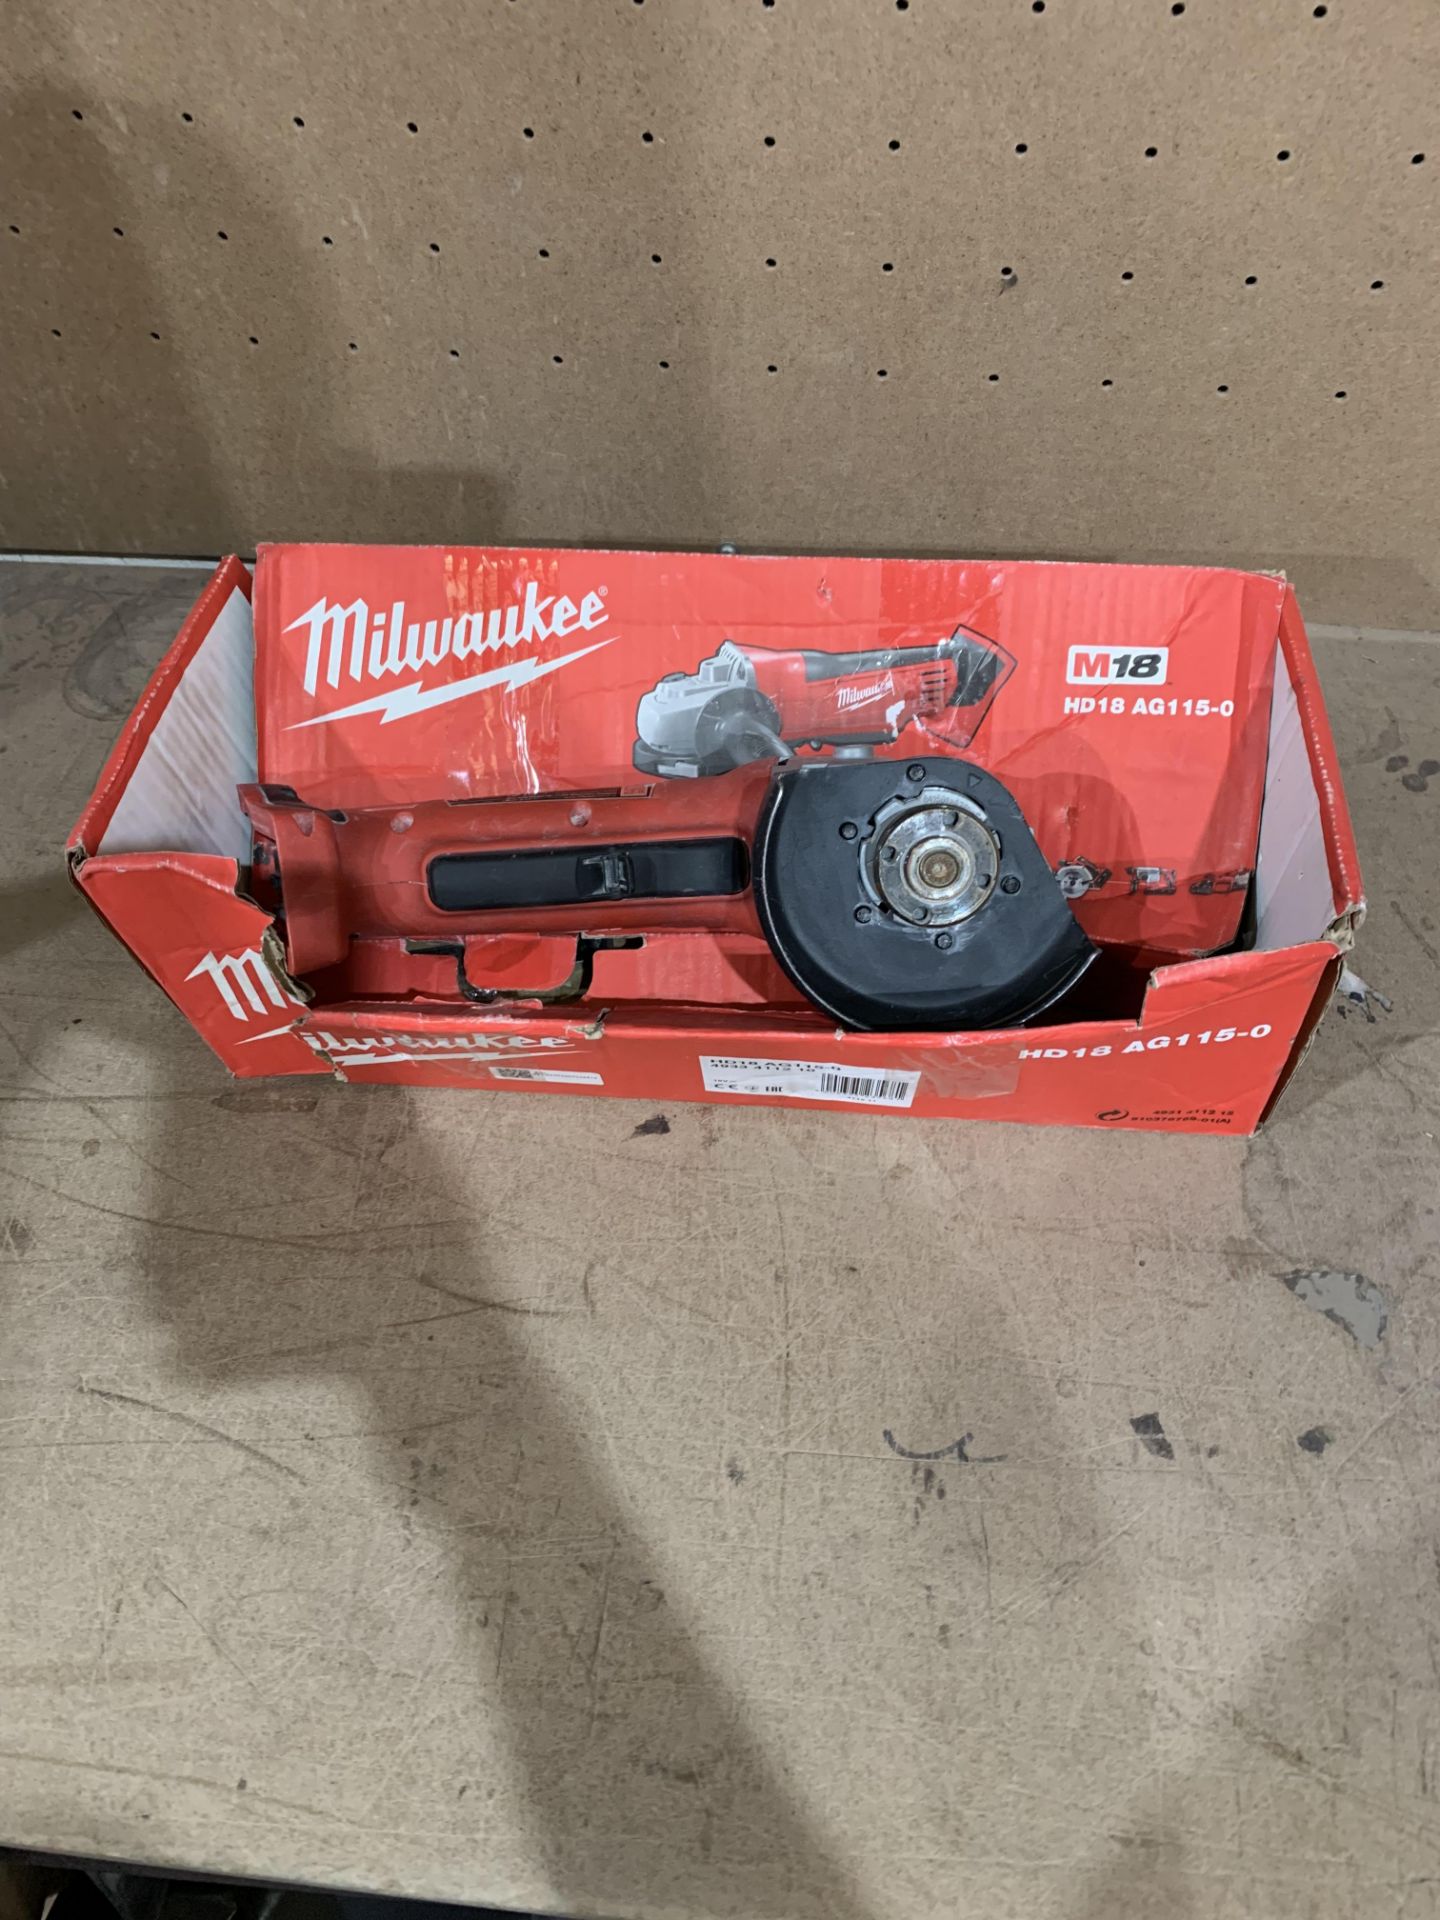 MILWAUKEE CORDLESS ANGLE GRINDER COMES WITH BOX (UNCHECKED, UNTESTED)